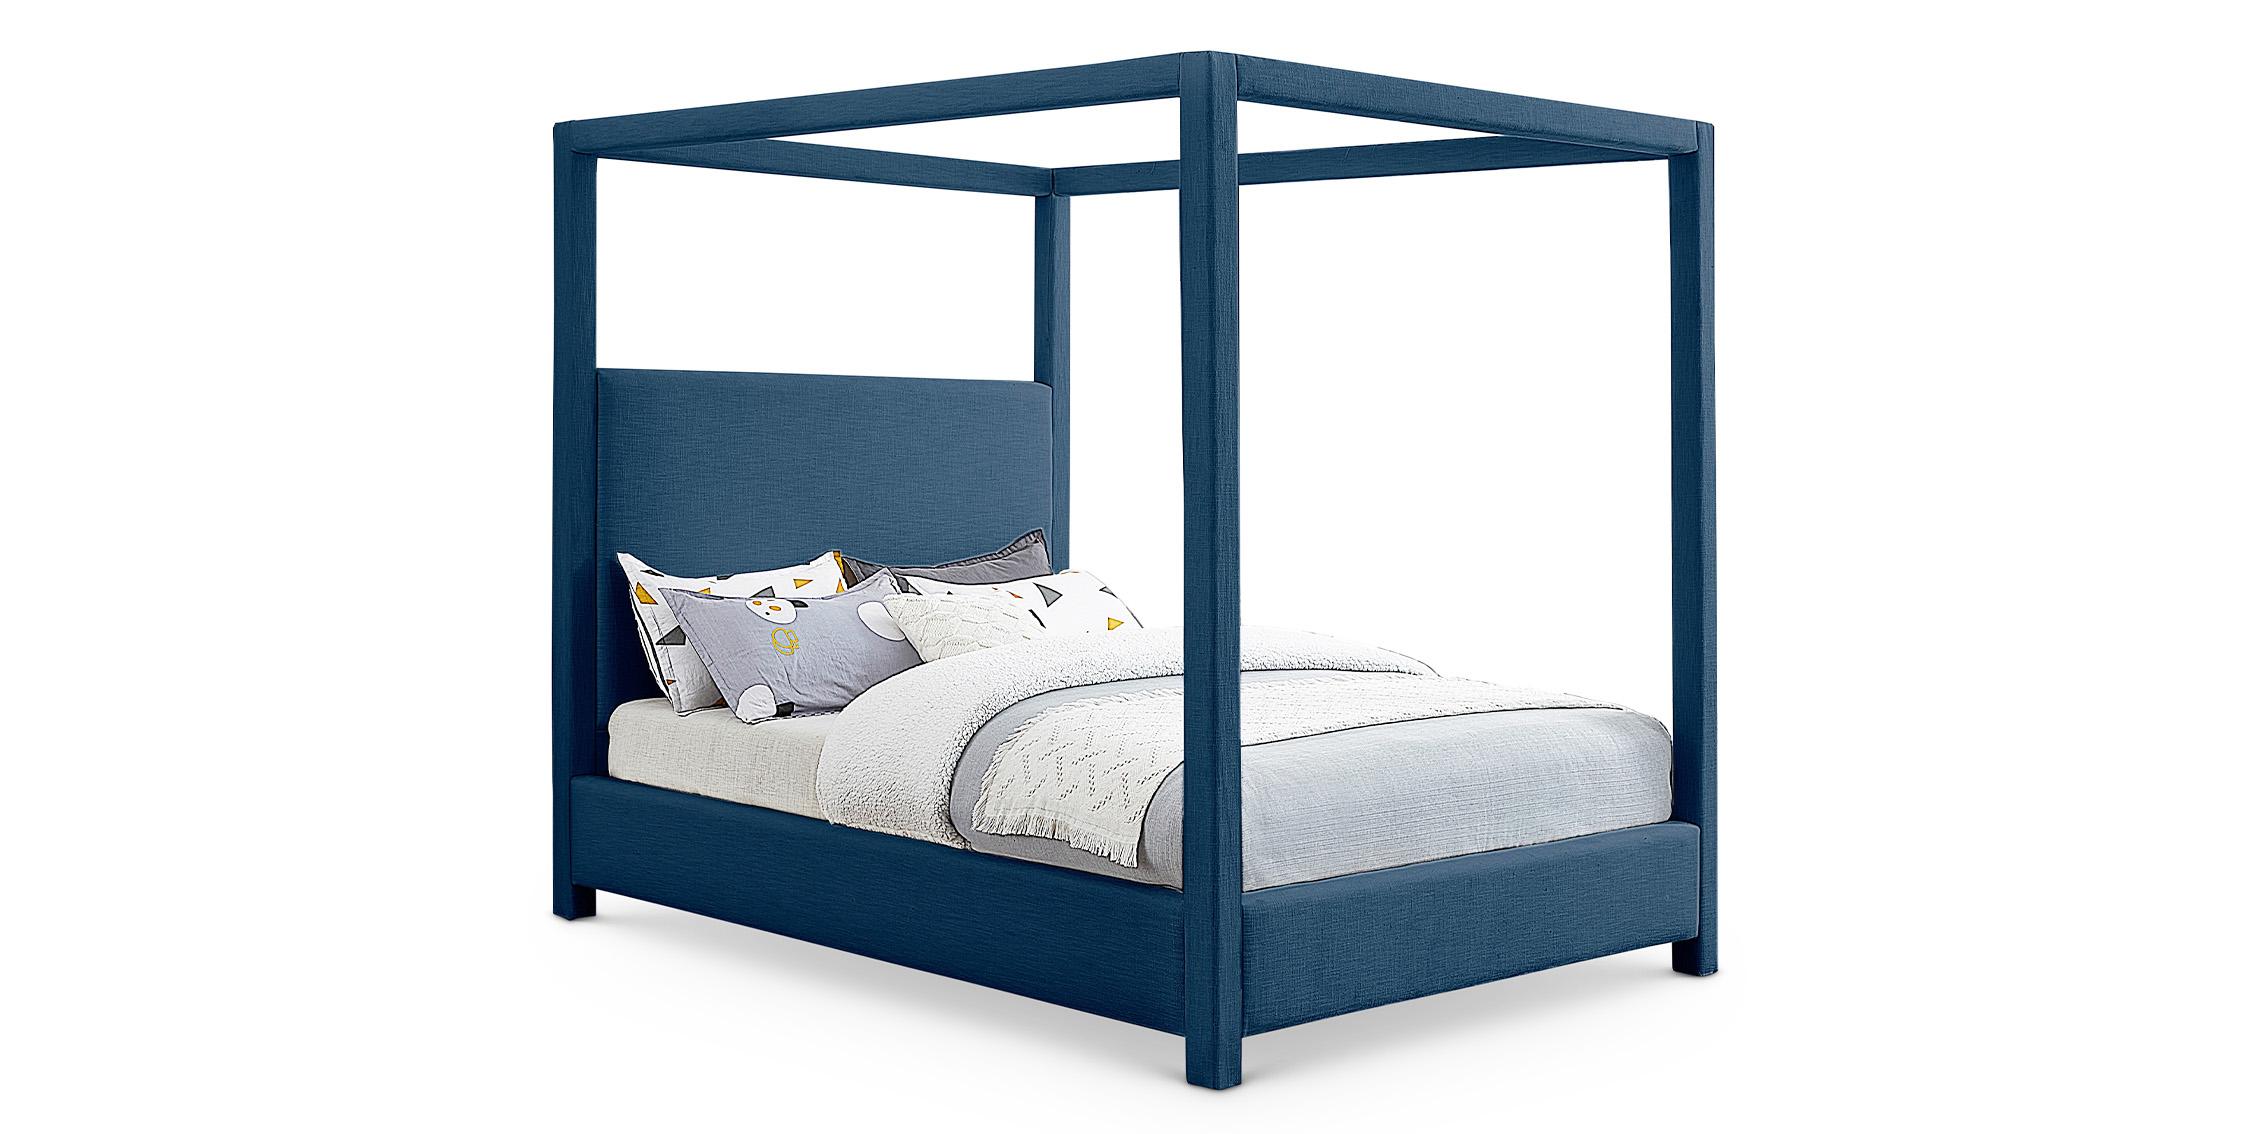 Meridian Furniture EmersonNavy-Q Canopy Bed